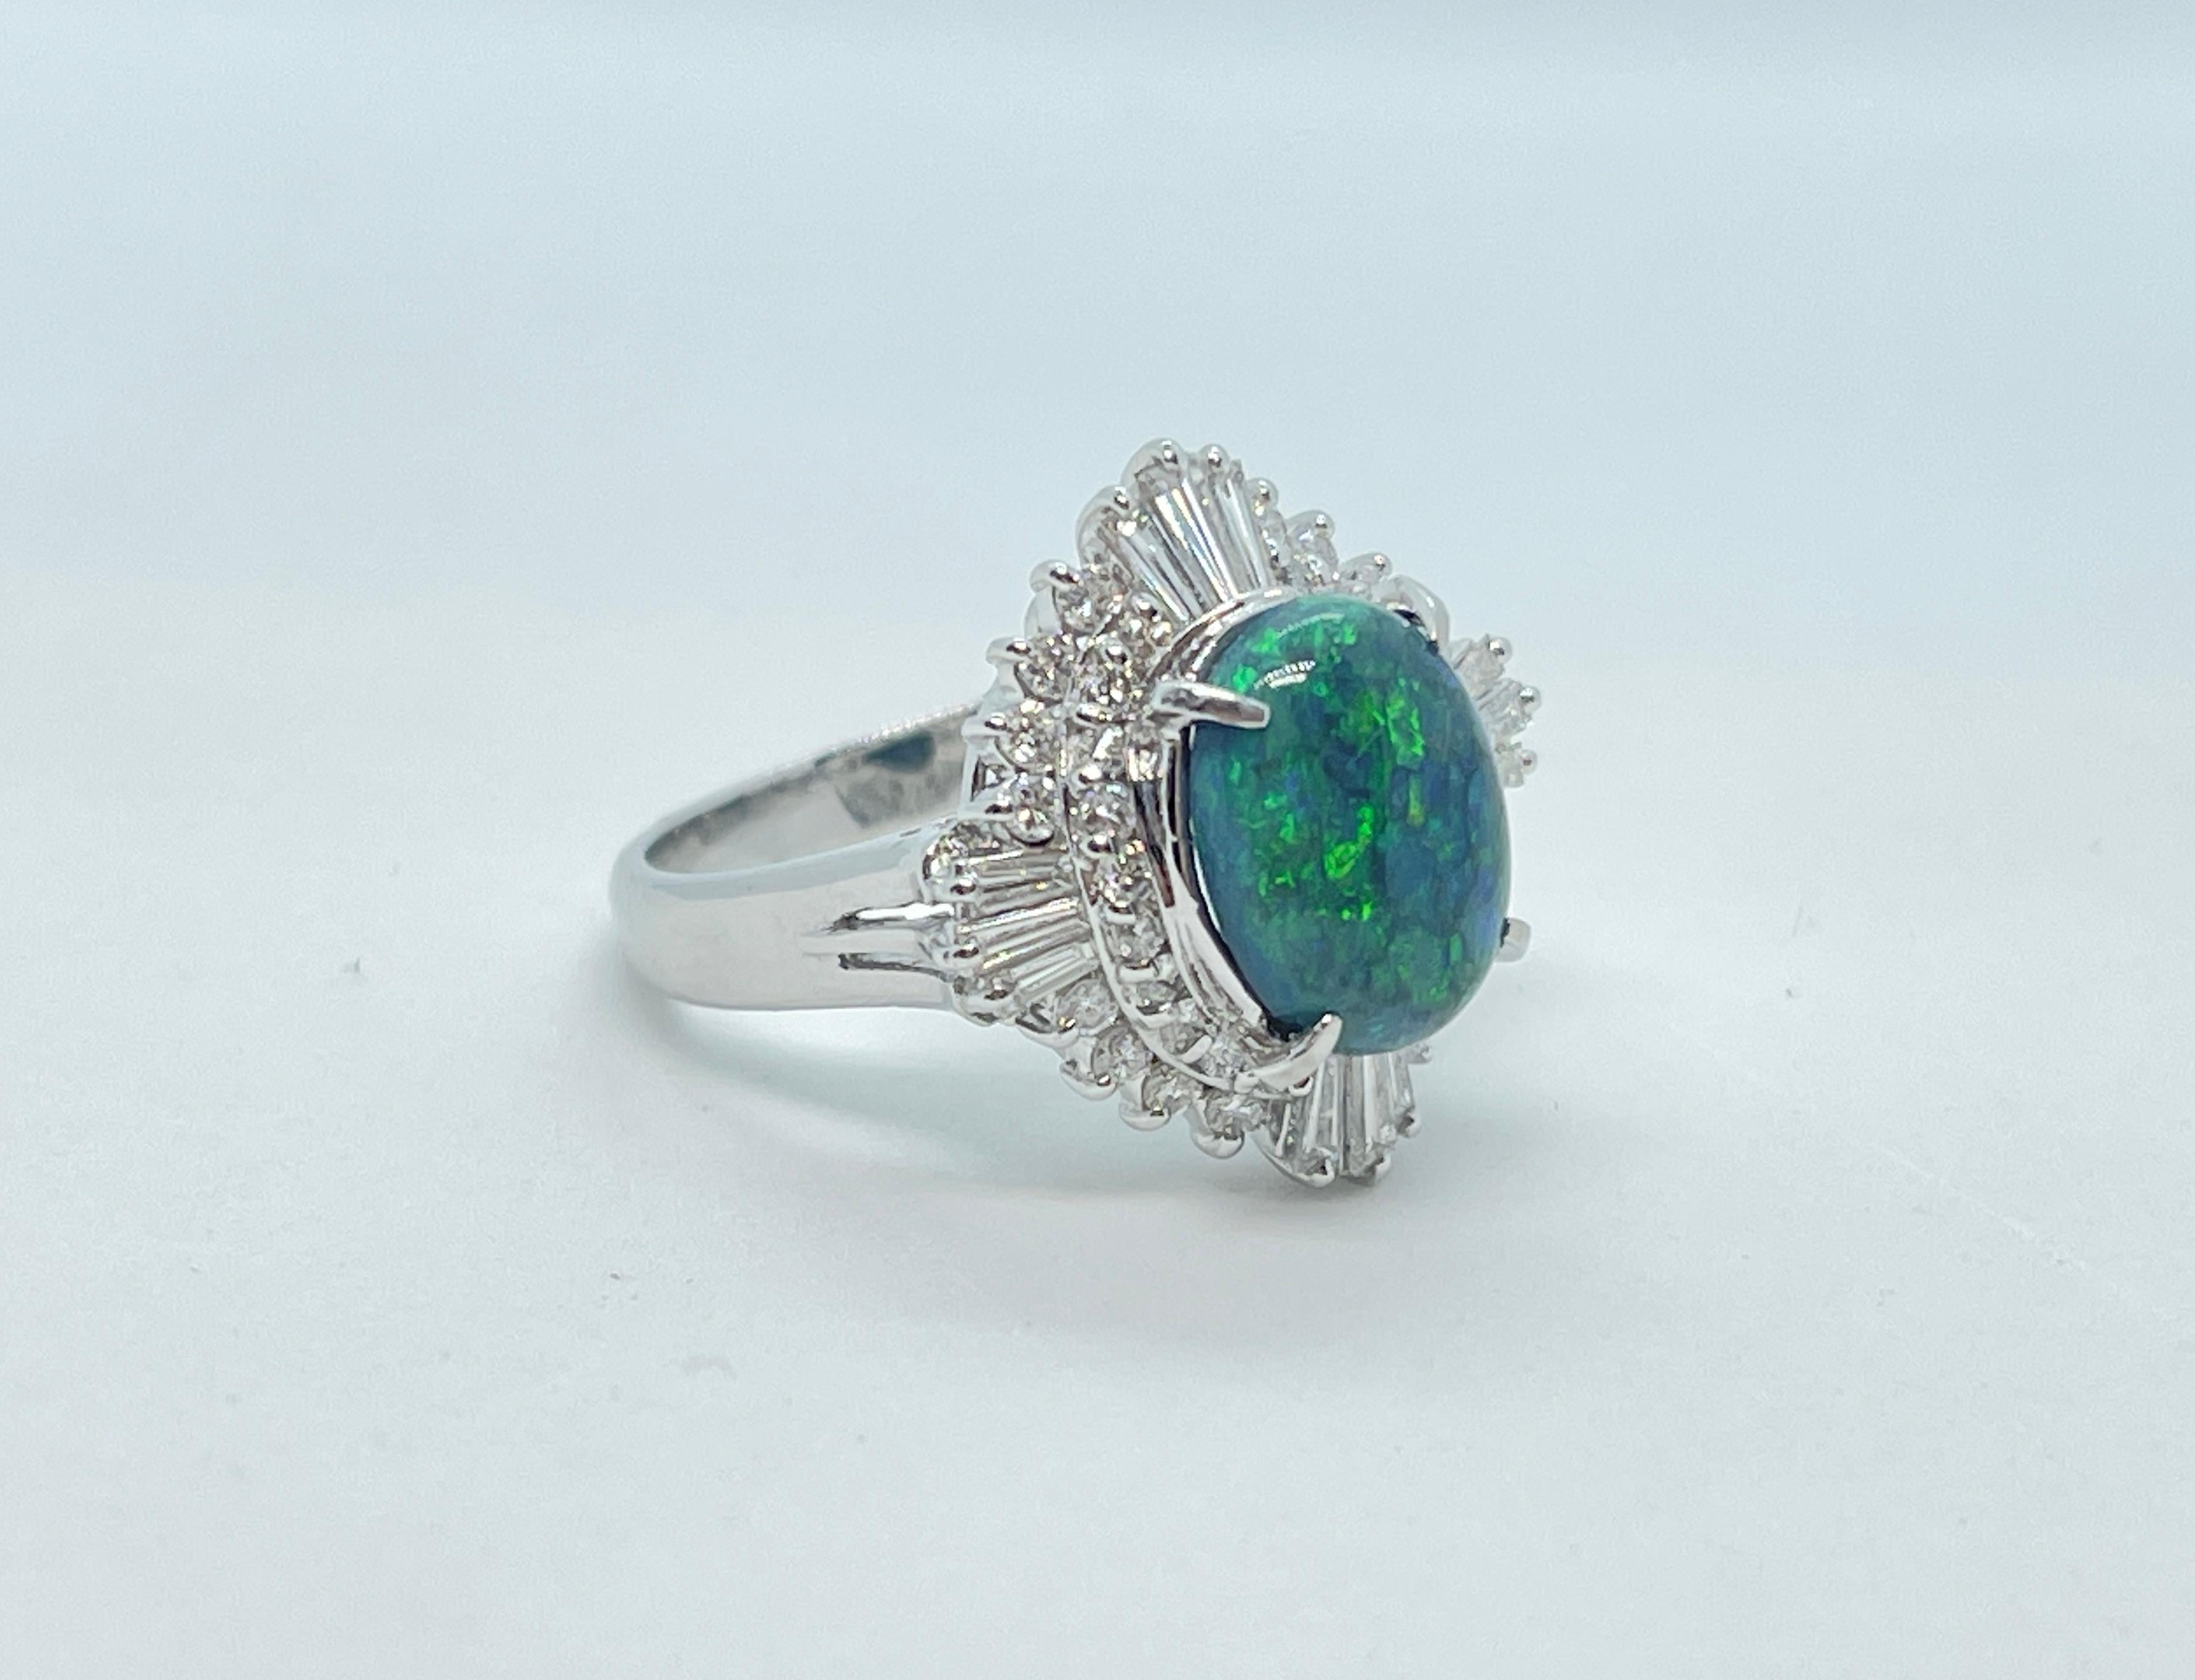 This amazing ring features a 2.08ct solid Black Opal with blue/green play of colour. The Precious Opal was mined in Australia and is set in Platinum.  There are 36 x Diamonds surrounding the Opal in a Ballerina style setting which comprises of